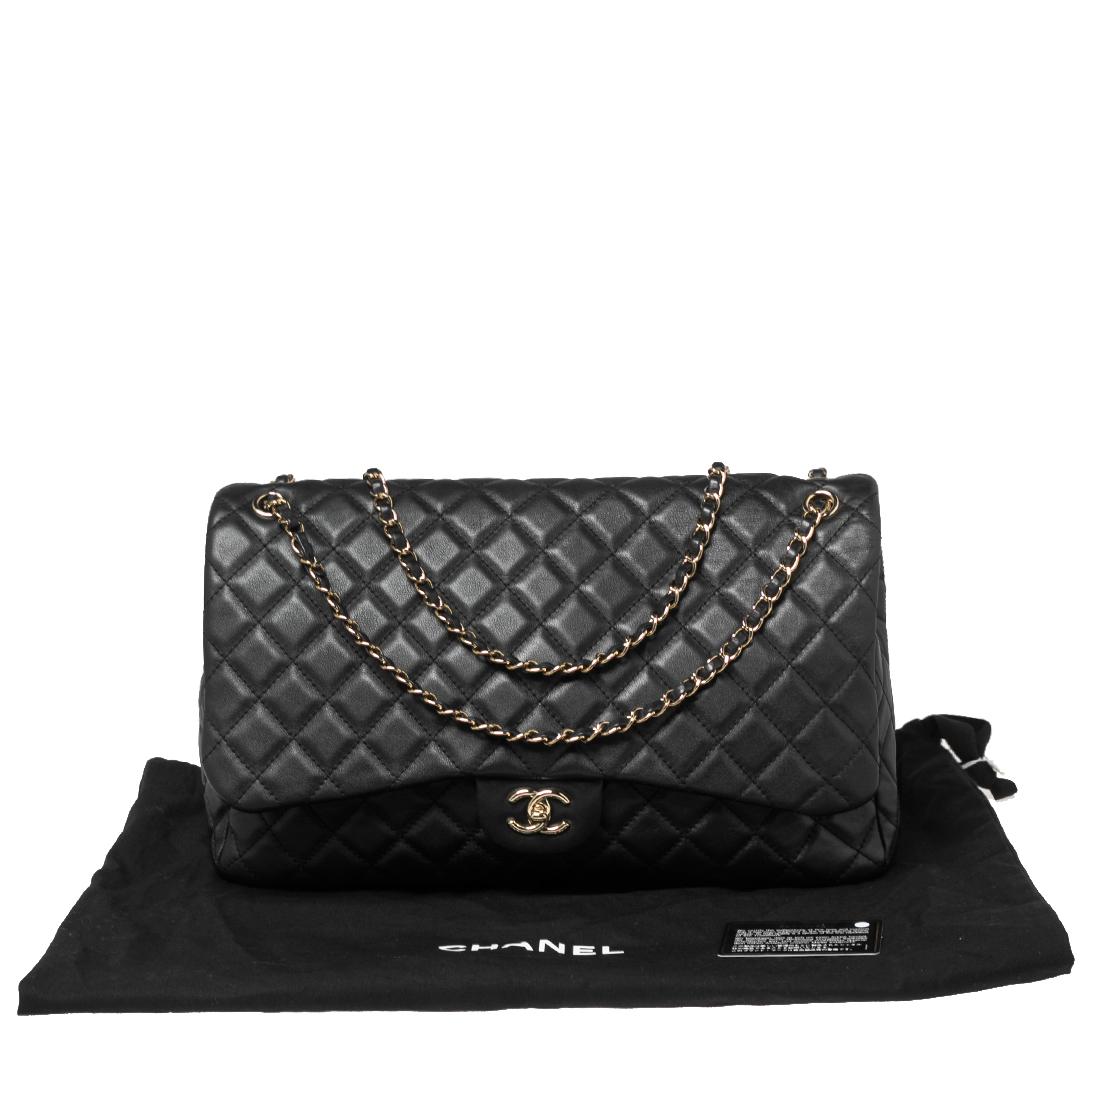 Chanel Black Quilted Leather Maxi Classic Flap Bag 8